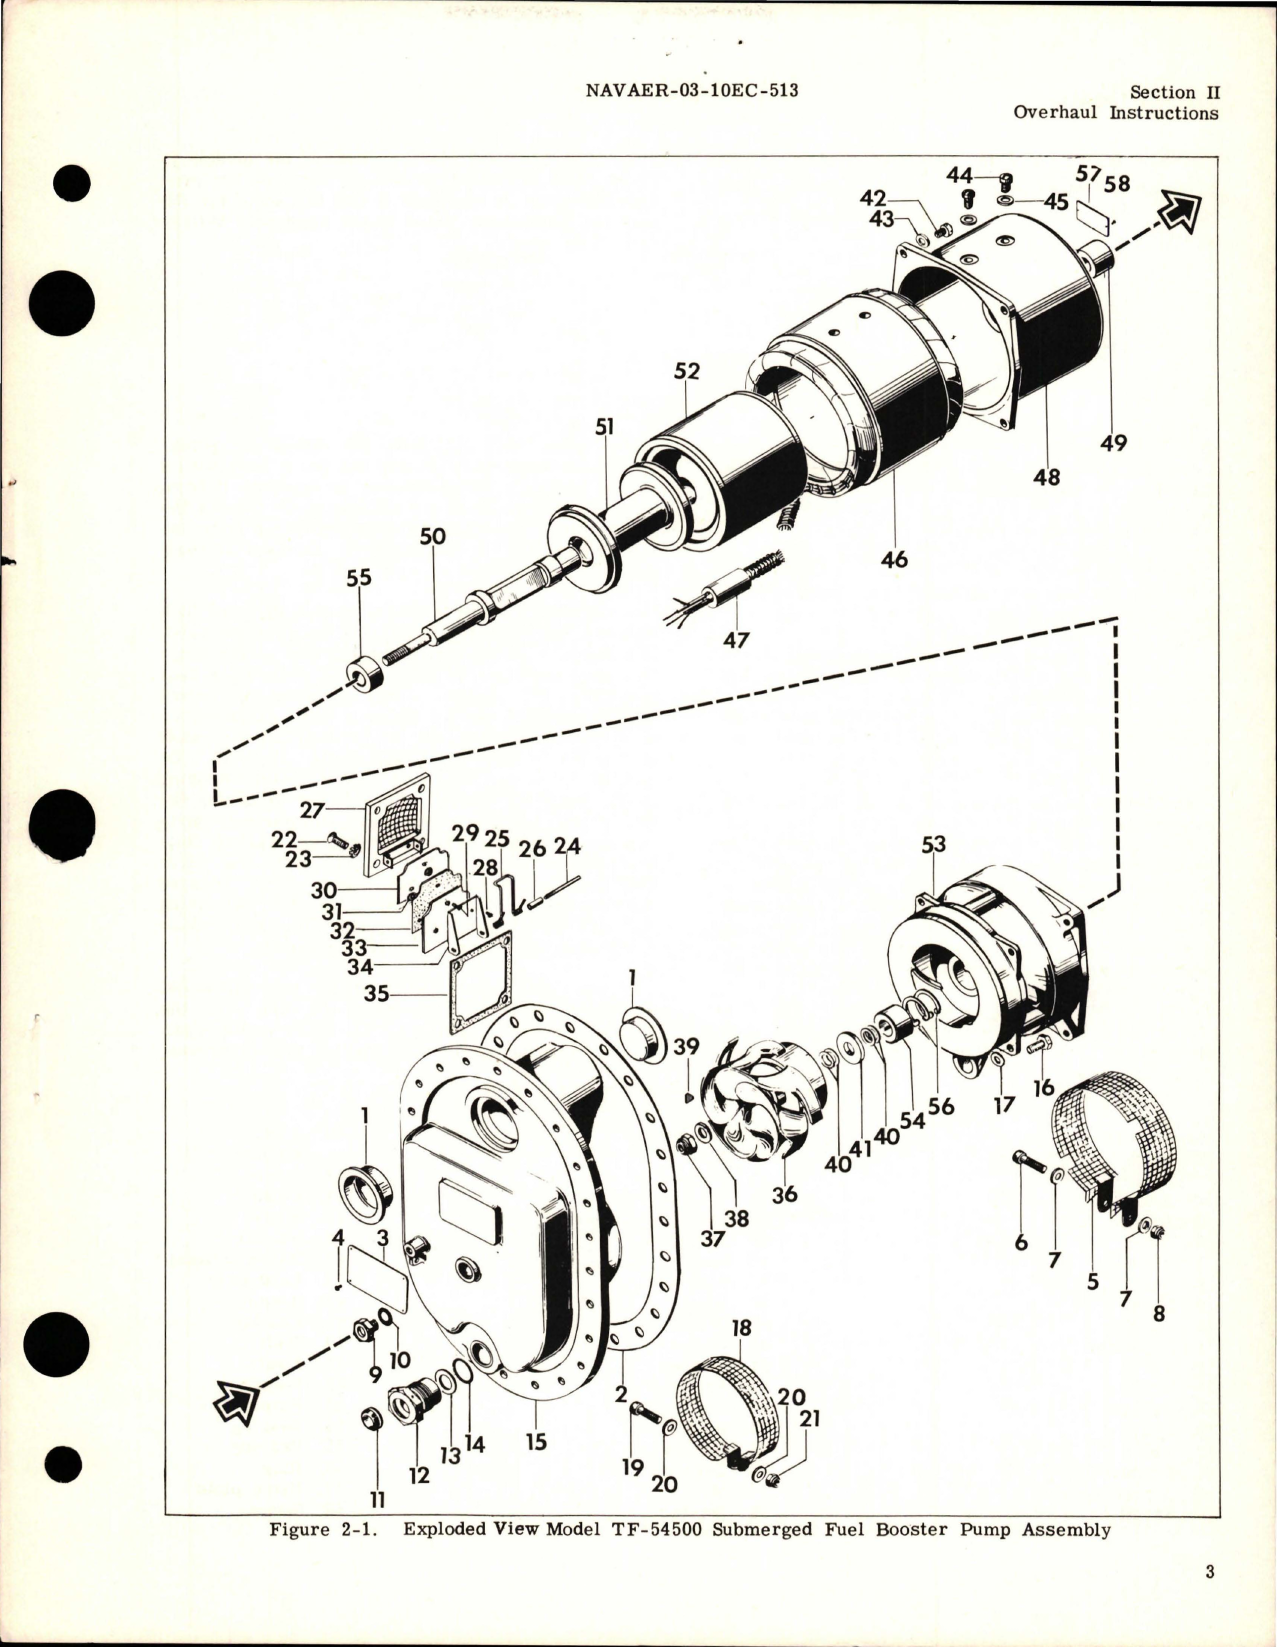 Sample page 5 from AirCorps Library document: Overhaul Instructions for Submerged Fuel Booster Pump - Model TF54500 Series